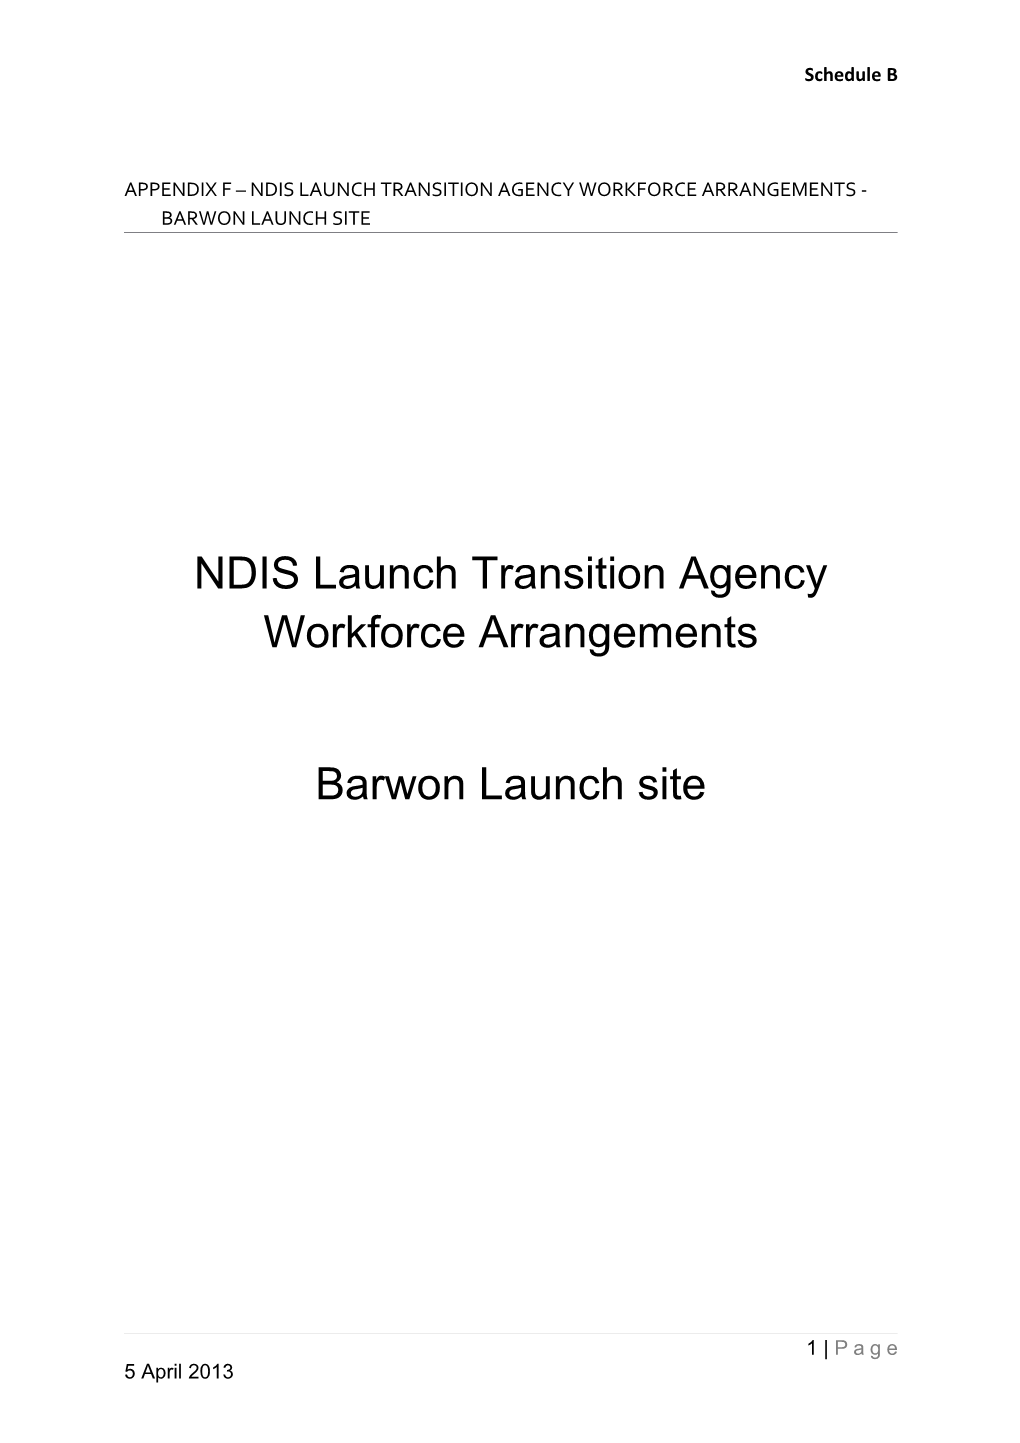 NDIS Launch Transition Agency Workforce Arrangements